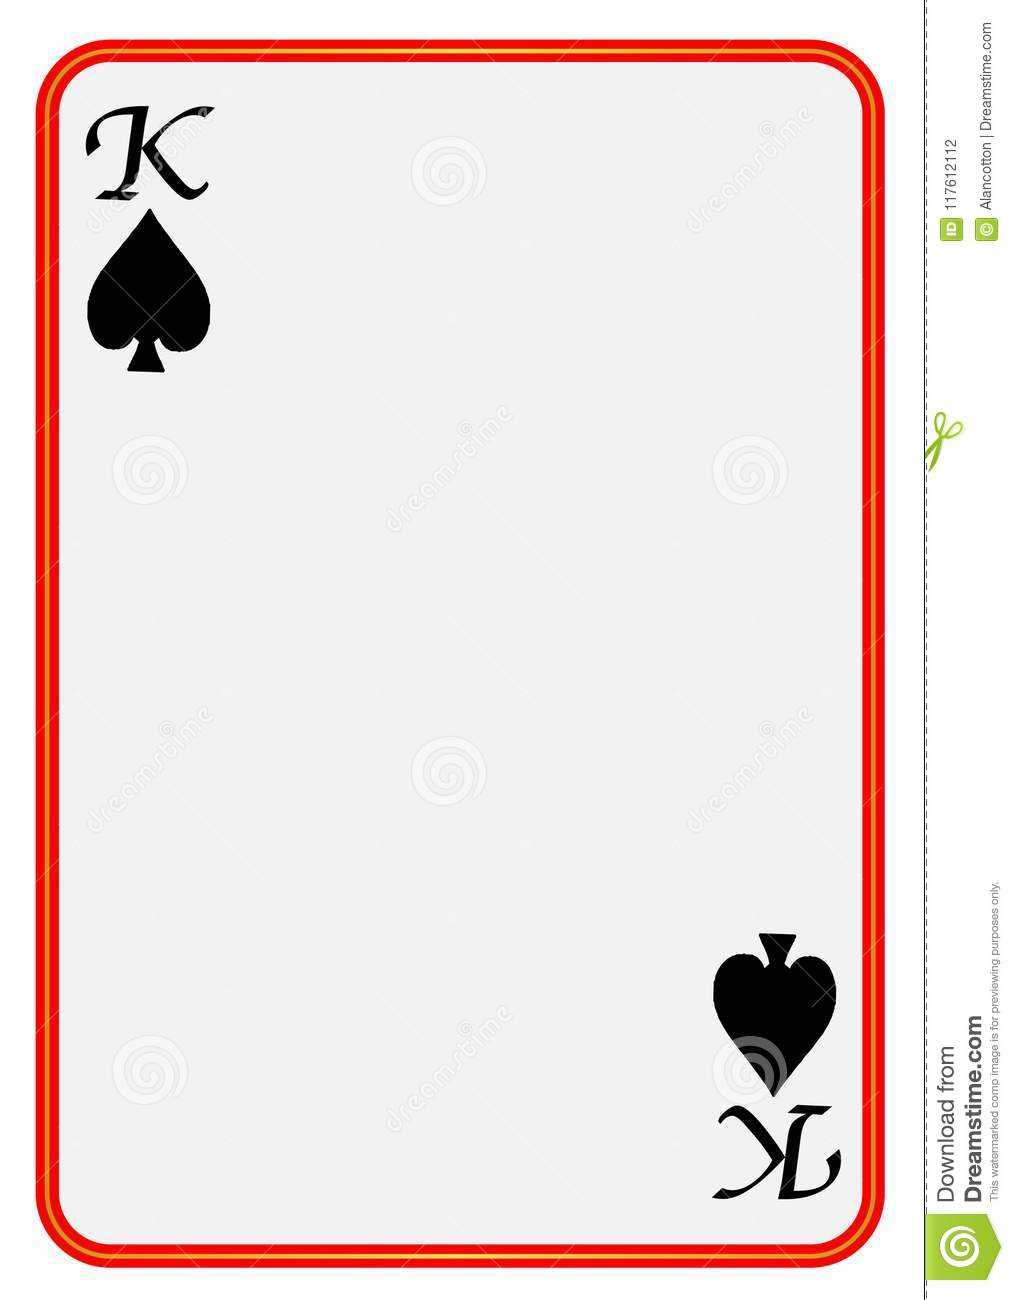 Blank Playing Card King Spades Stock Vector – Illustration Throughout Blank Playing Card Template